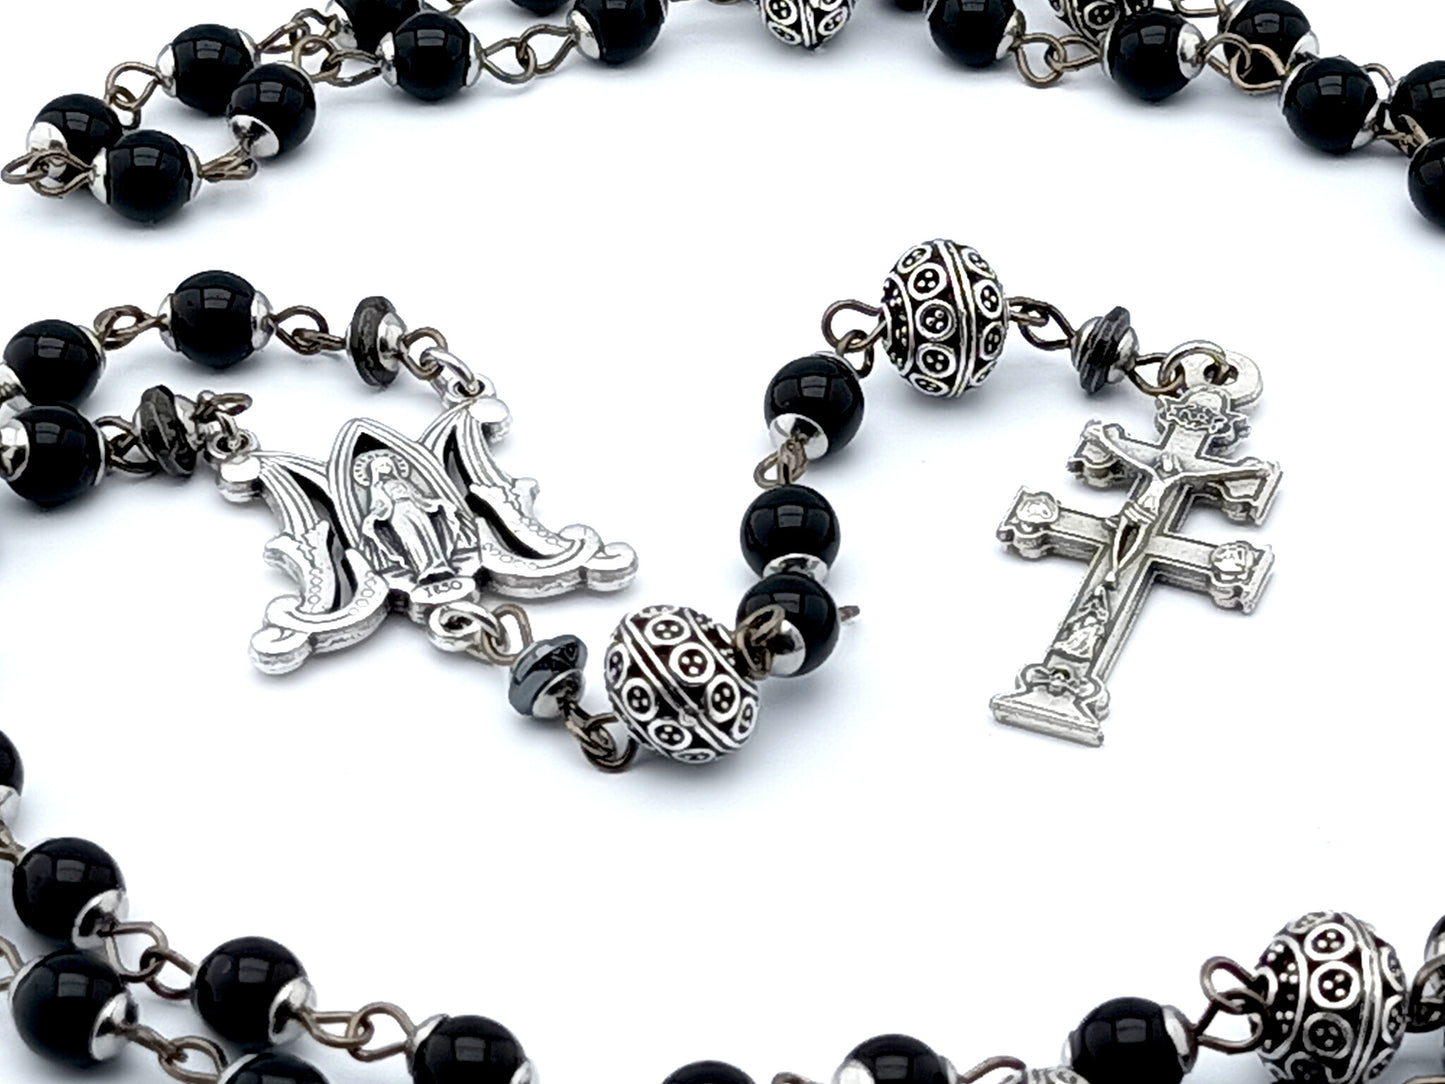 Miraculous Medal black glass rosary beads with Angels crucifix.